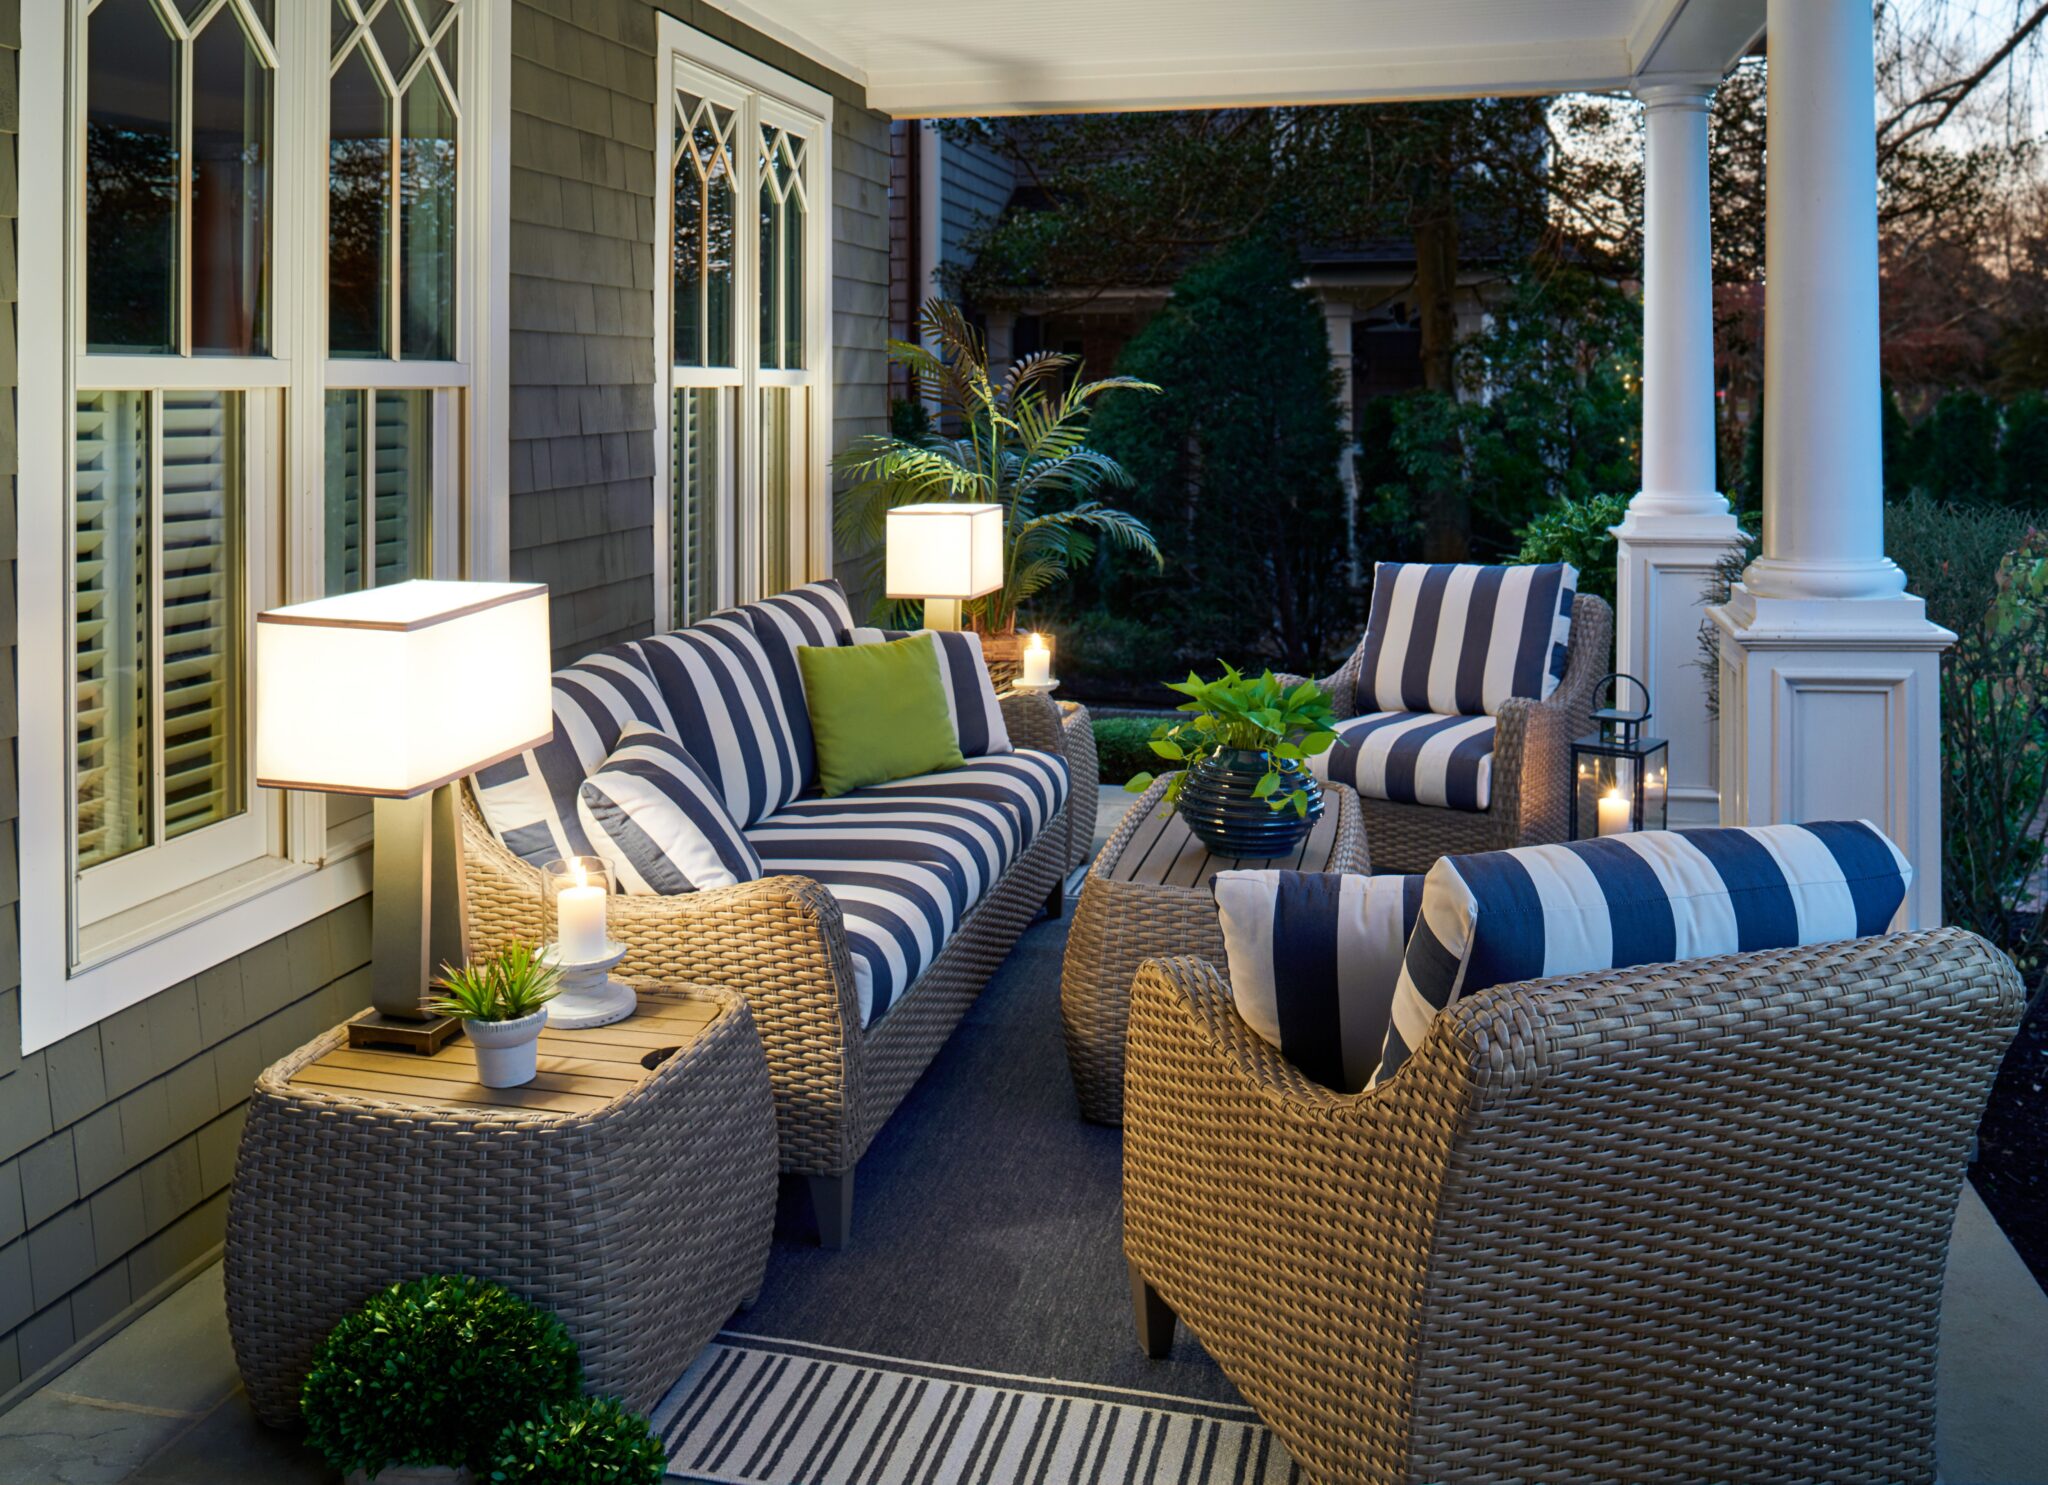 Create A Relaxing Space With Outdoor Lighting